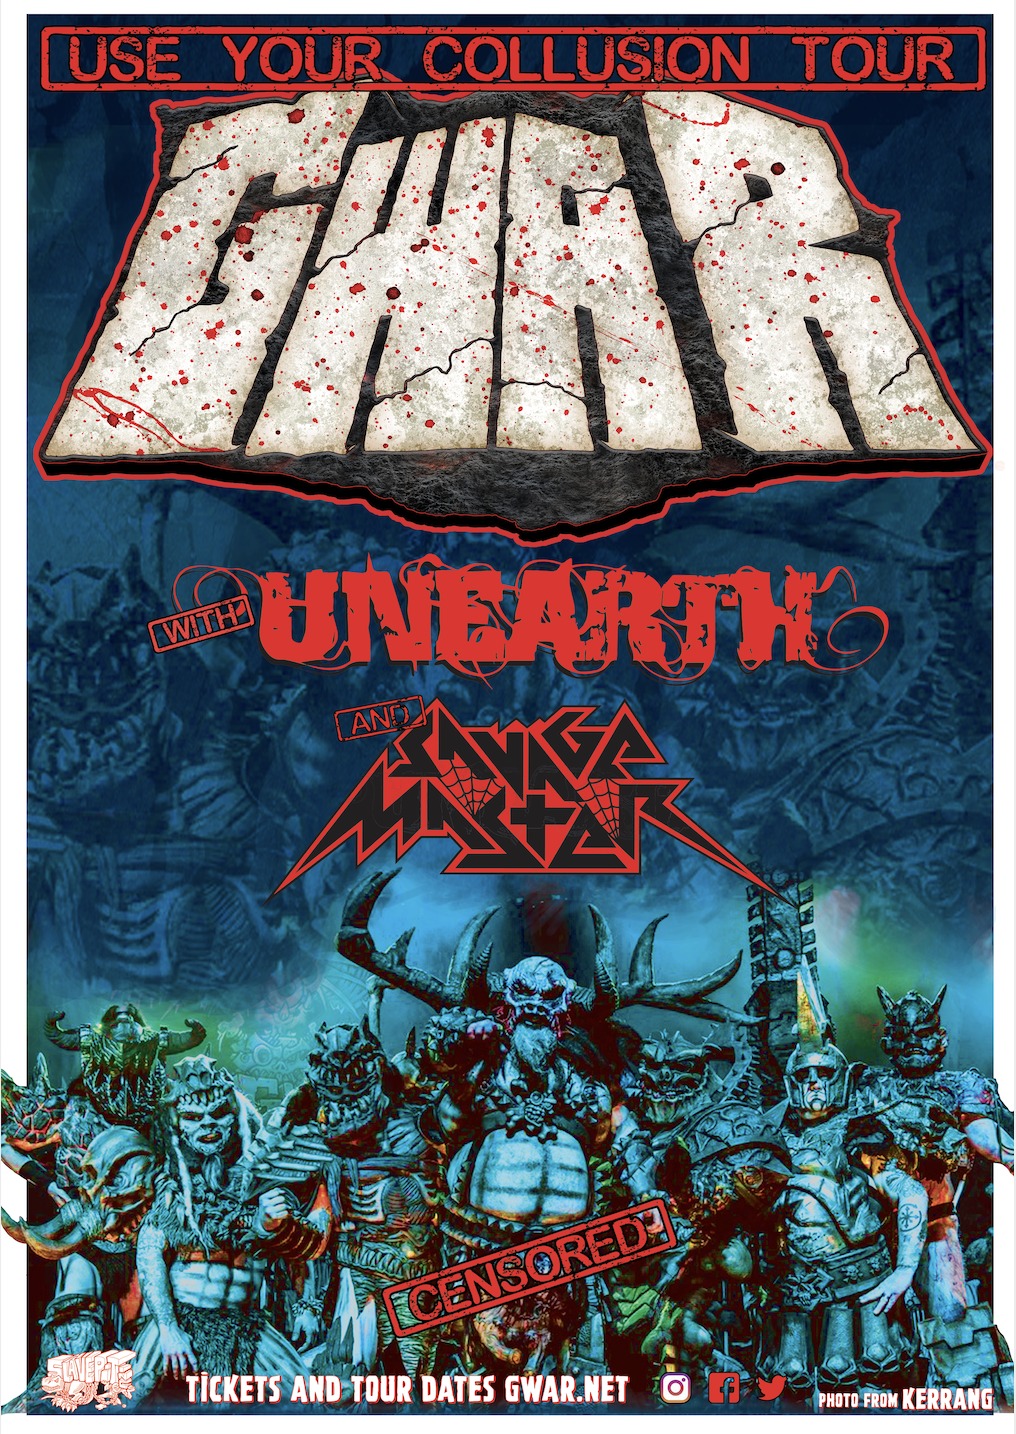 GWAR Announces “Use Your Collusion” Holiday Tour Dates!